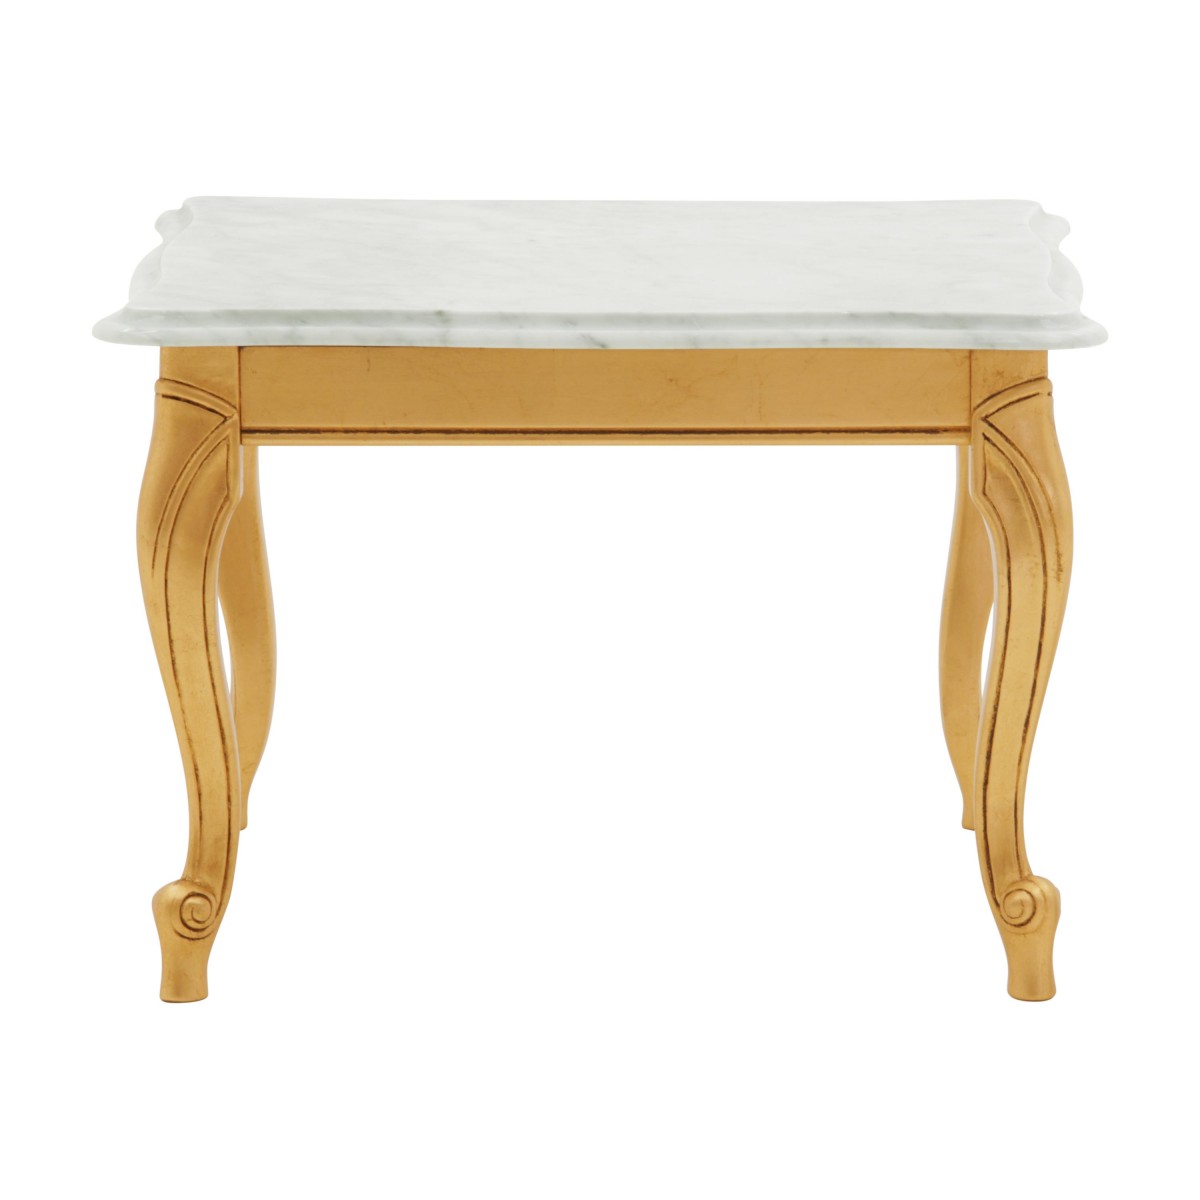 luis style small table diomede copia 7819